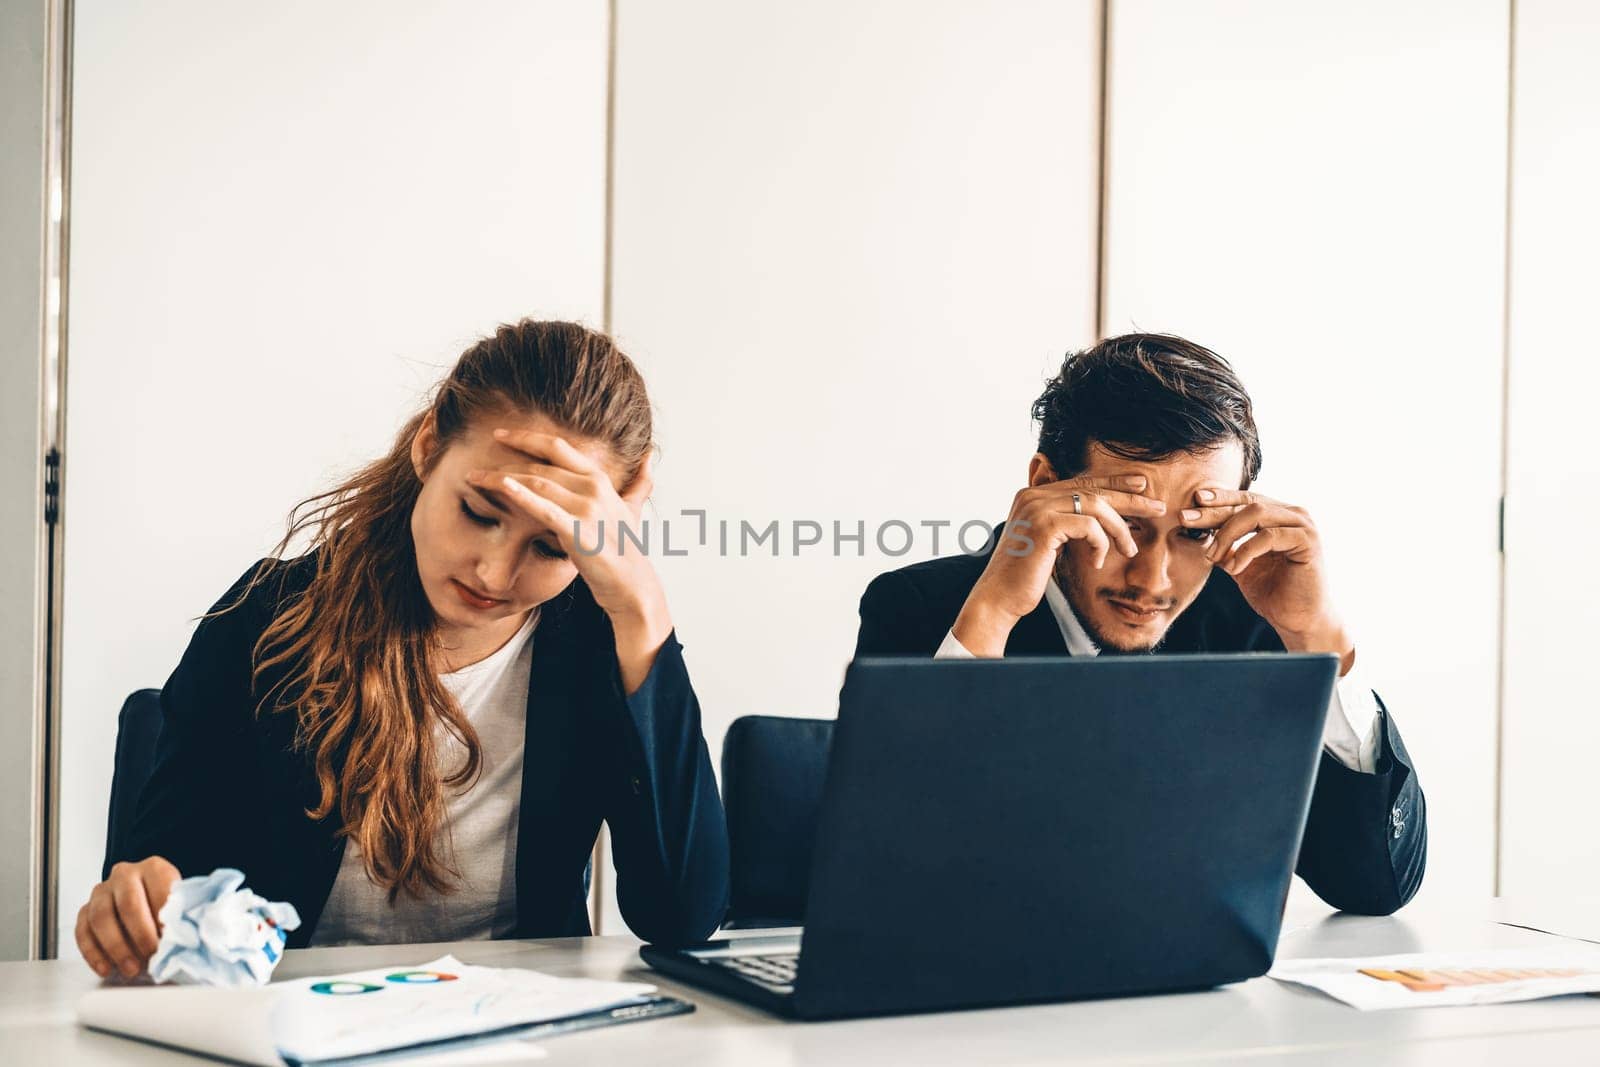 Unhappy serious businessman and businesswoman working using laptop computer on the office desk. Bad business crisis situation and bankruptcy concept. uds